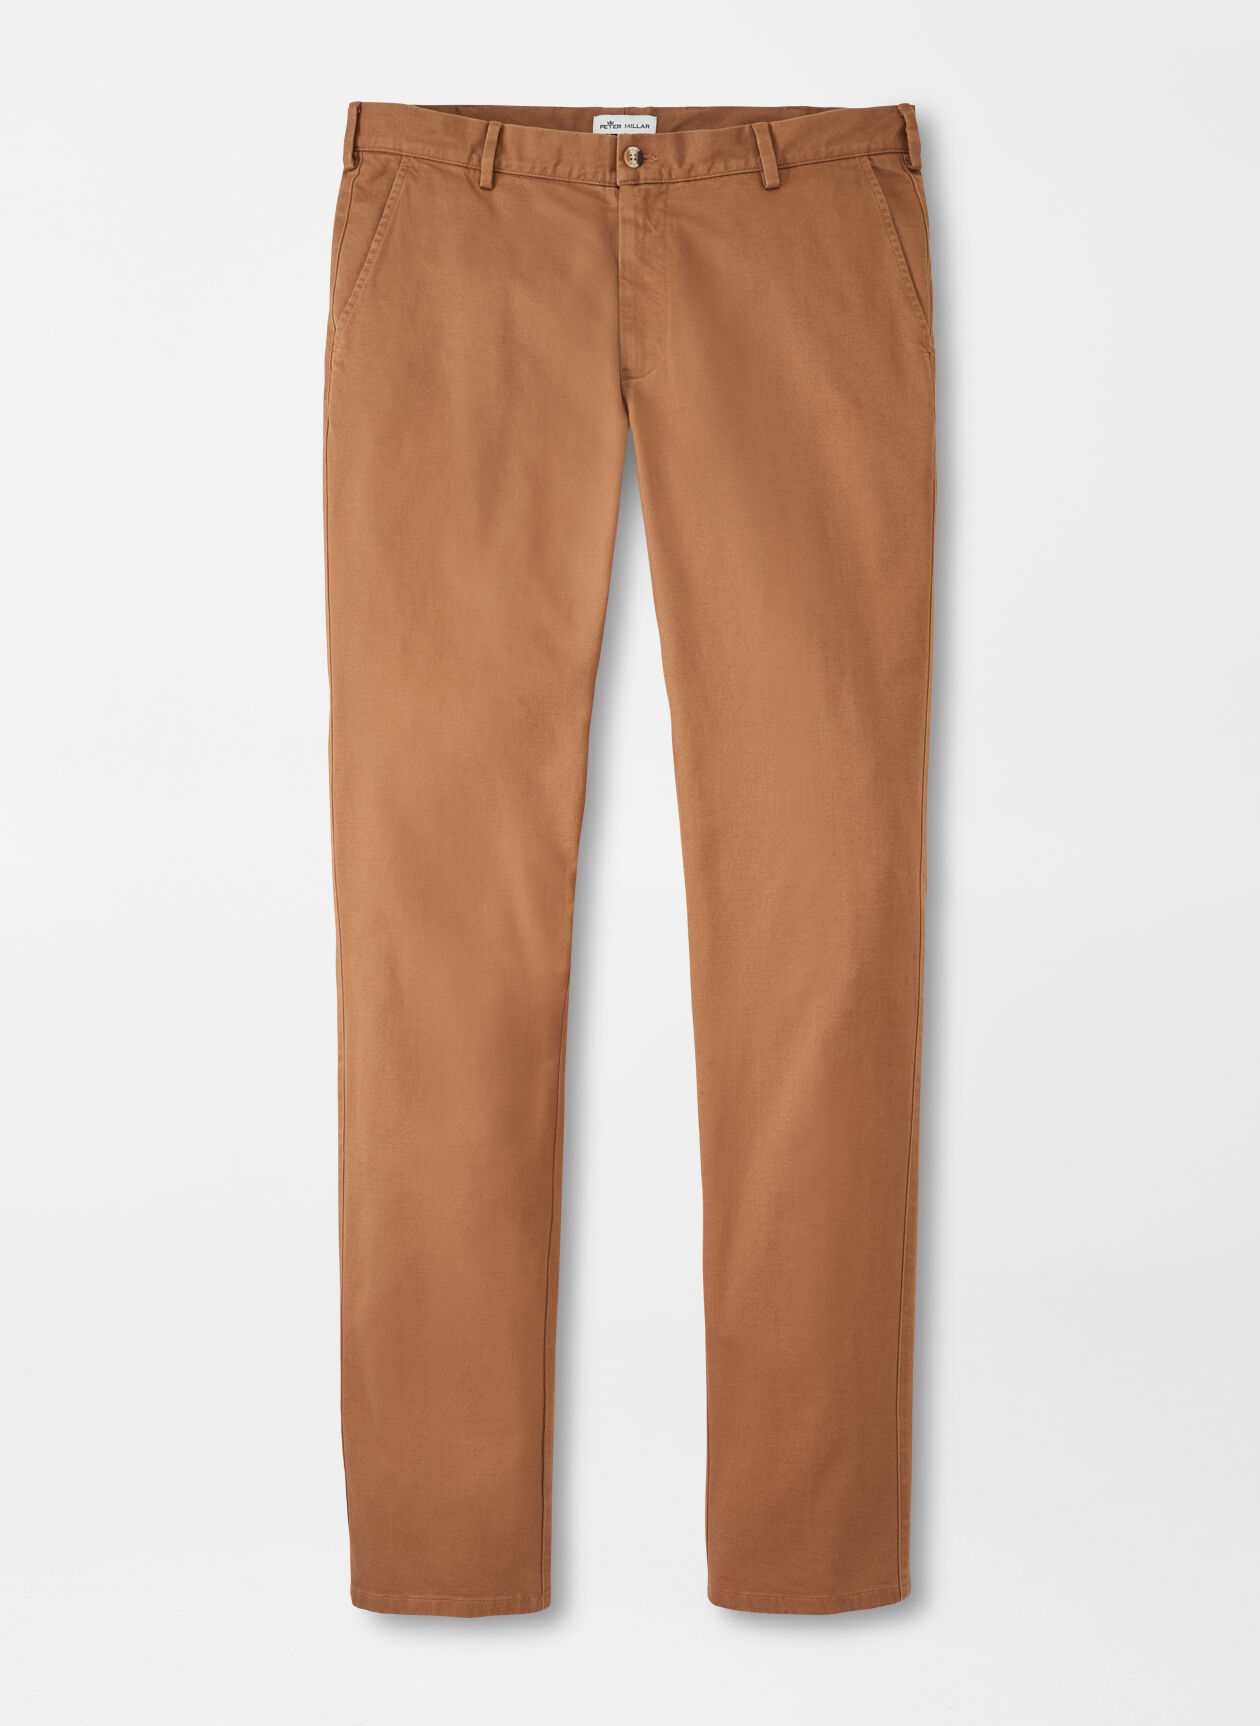 Pilot Twill Flat Front Trouser in British Tan Size 30x29 with Plain Bottom  by Peter Millar - Hansen's Clothing